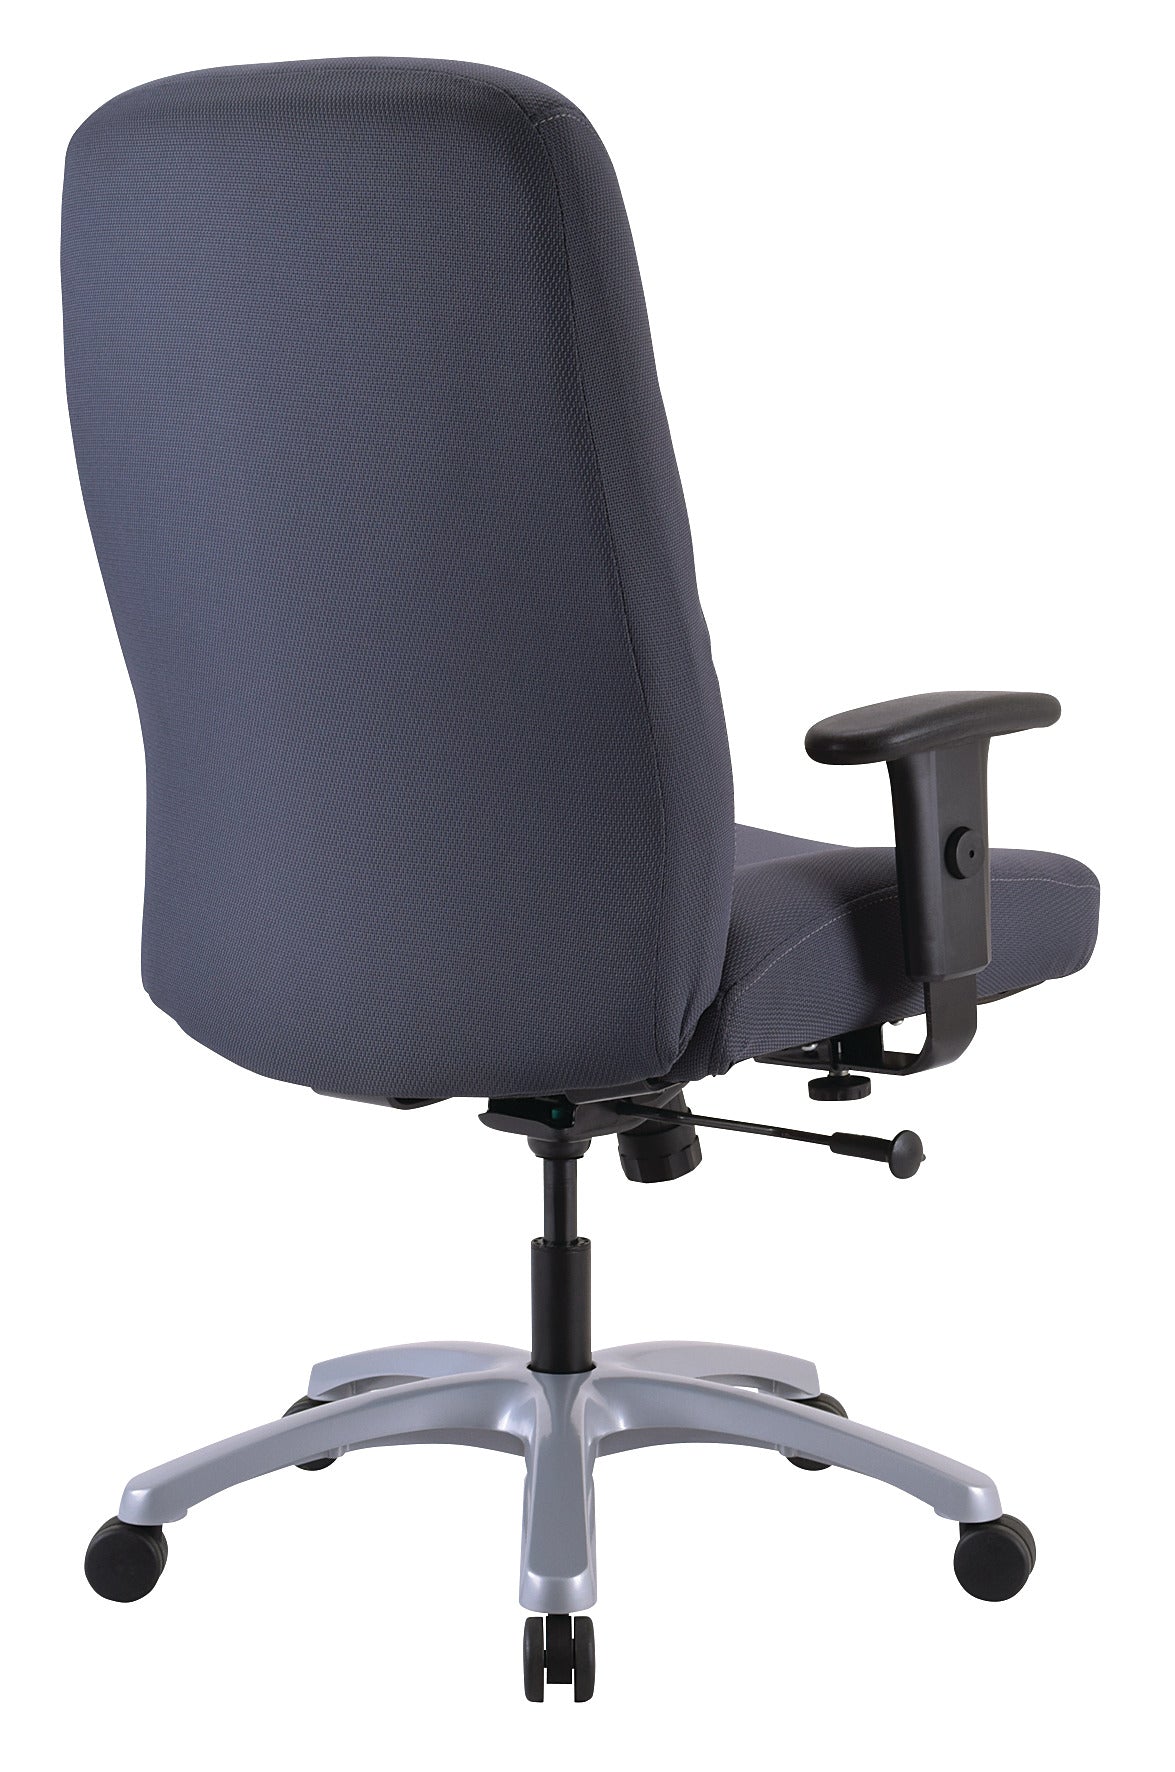 excelsior 350 heavyduty office chair